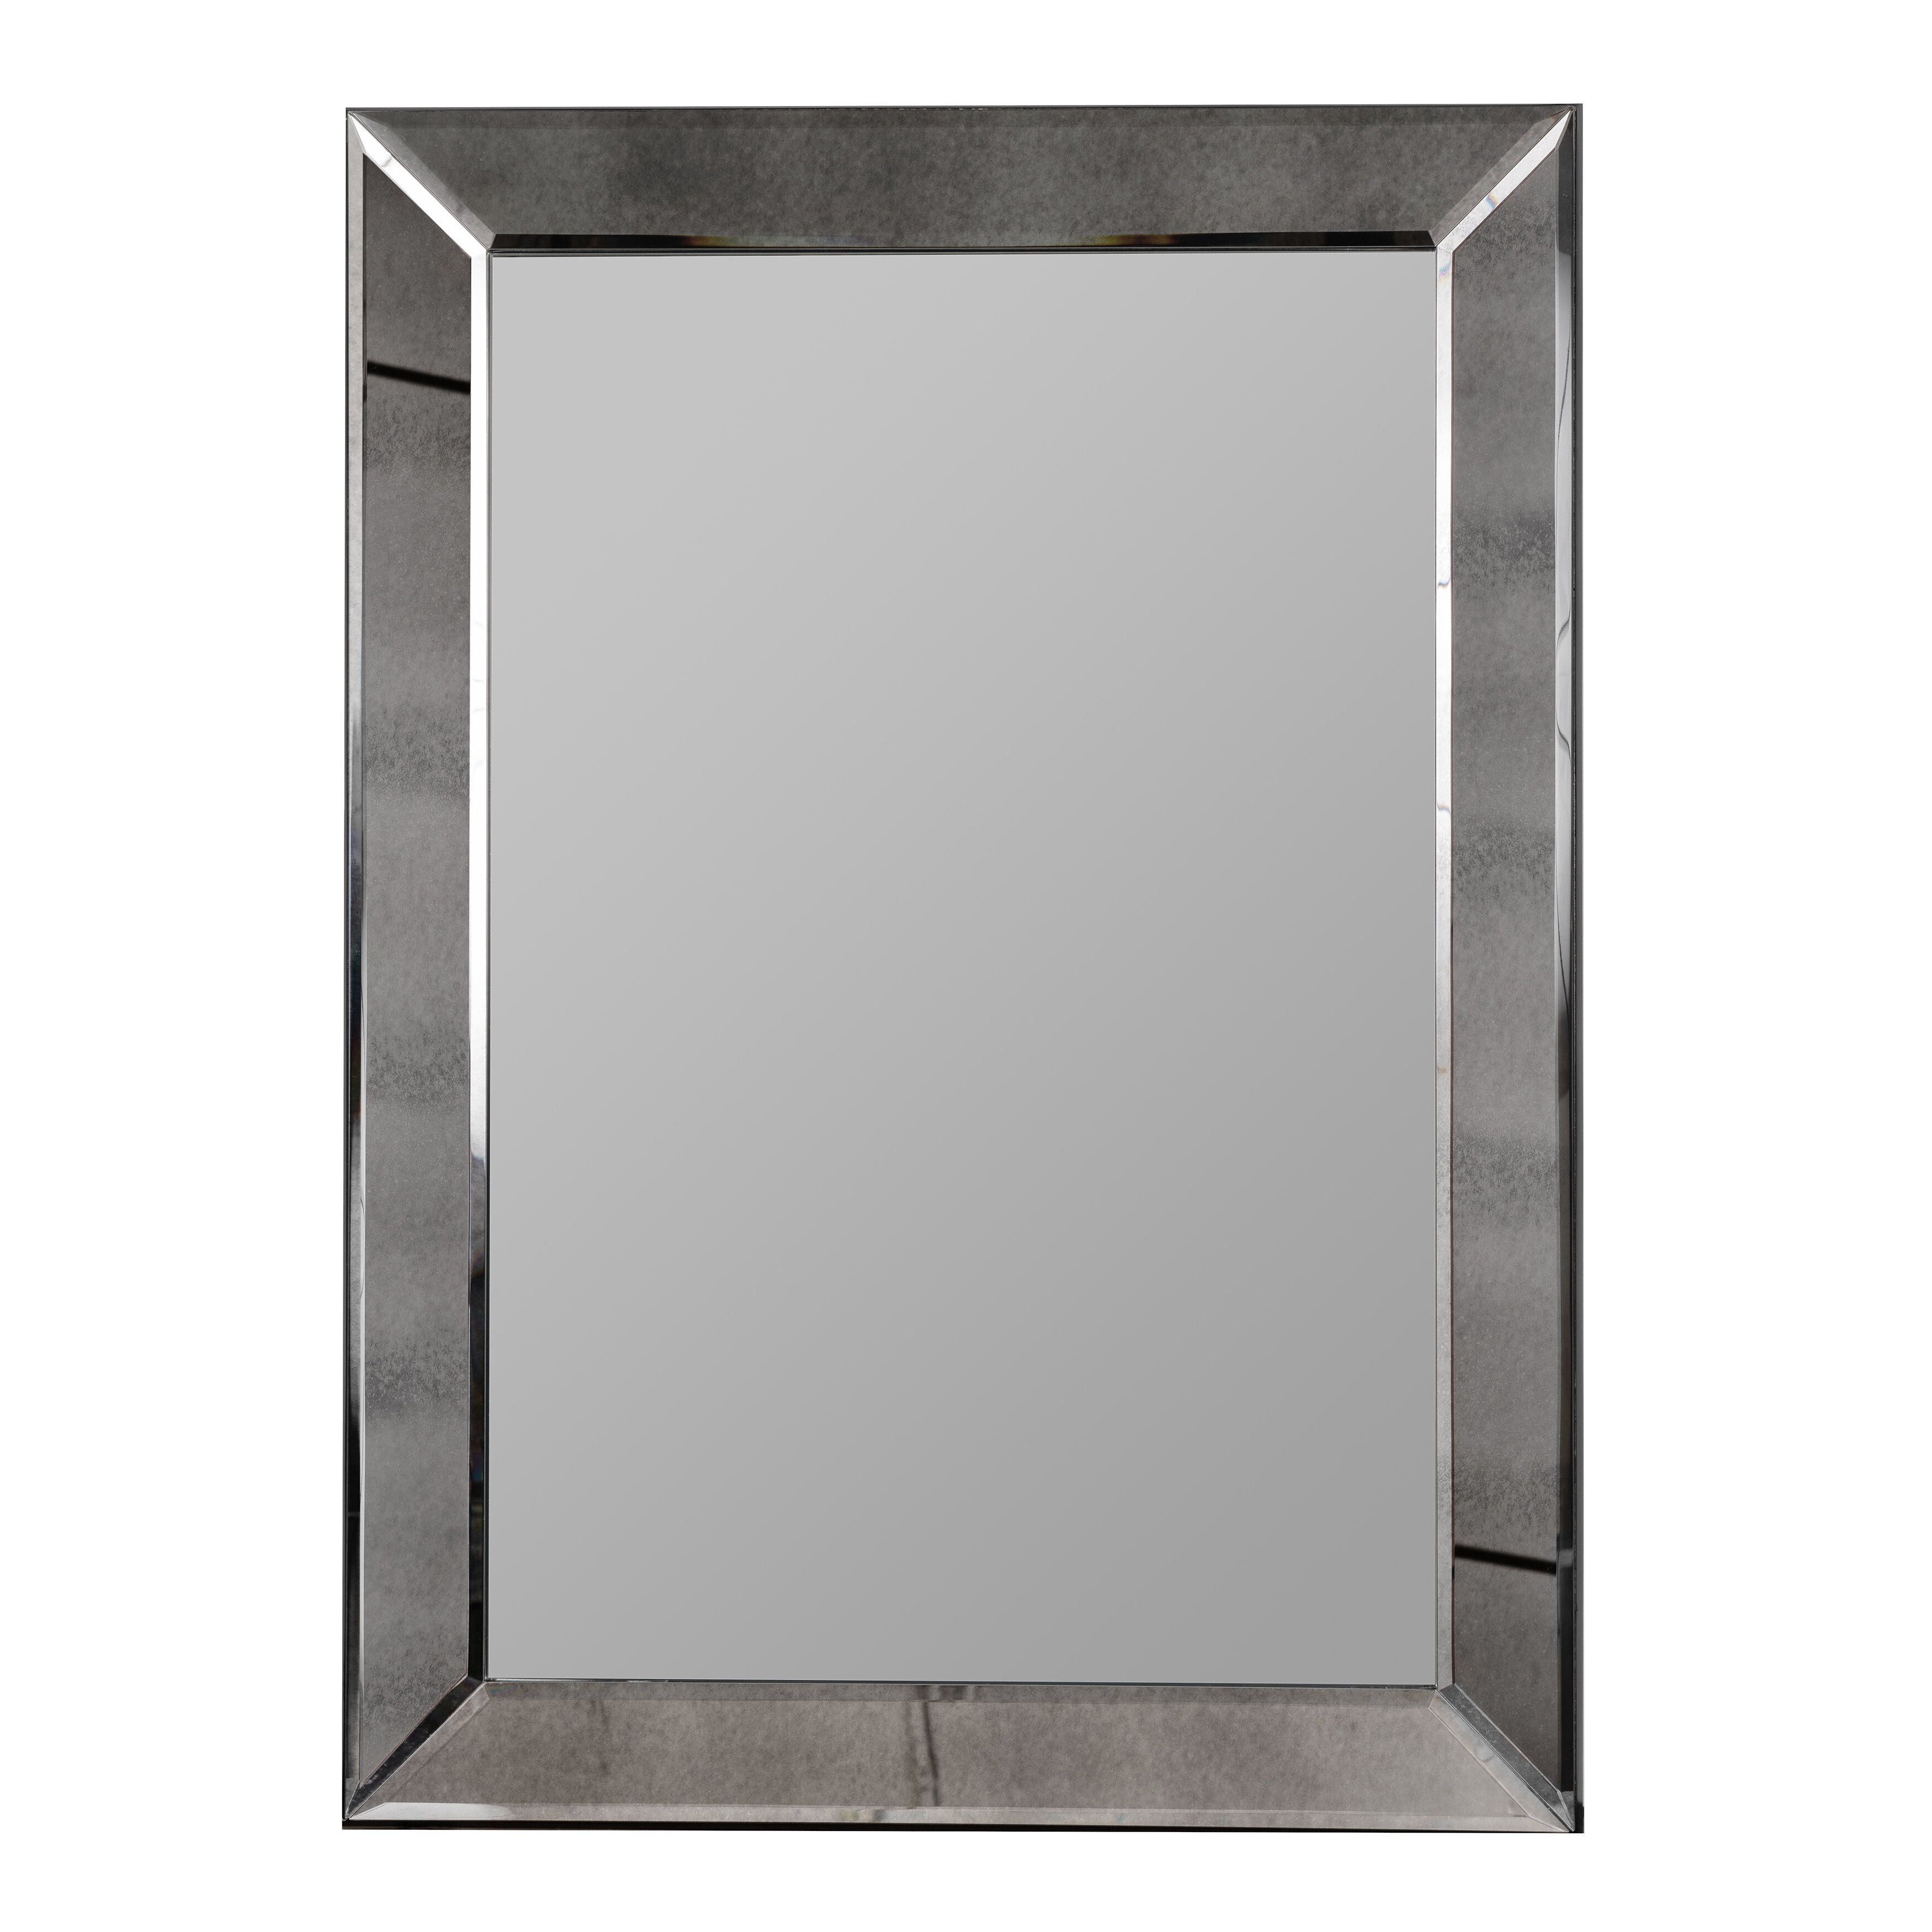 Framed Wall & Accent Mirrors | Allmodern Throughout Rena Accent Mirrors (View 7 of 30)